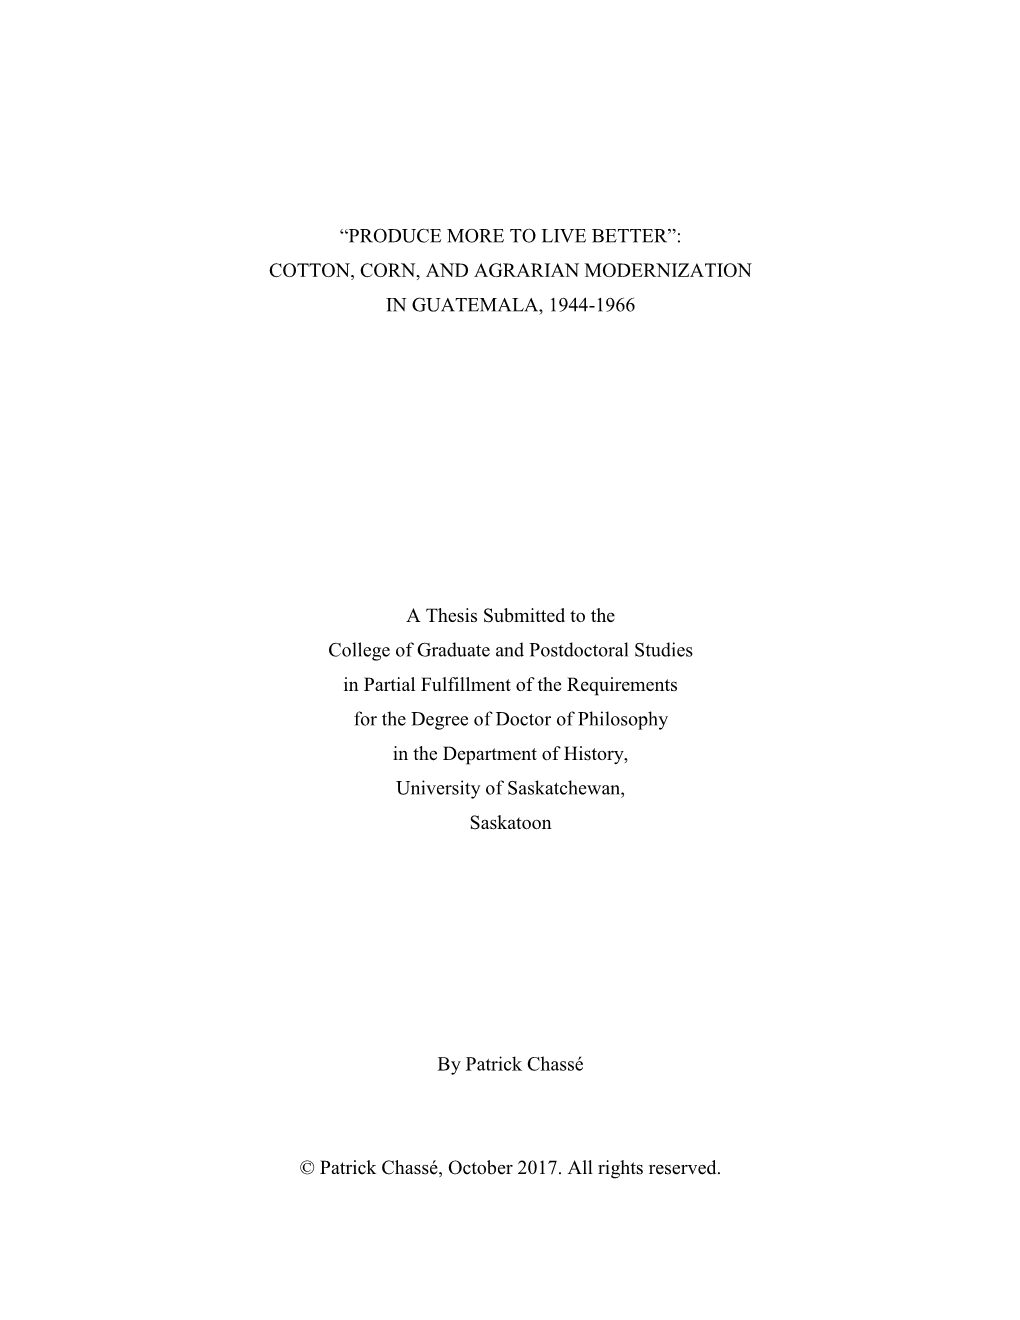 COTTON, CORN, and AGRARIAN MODERNIZATION in GUATEMALA, 1944-1966 a Thesis Submitted To